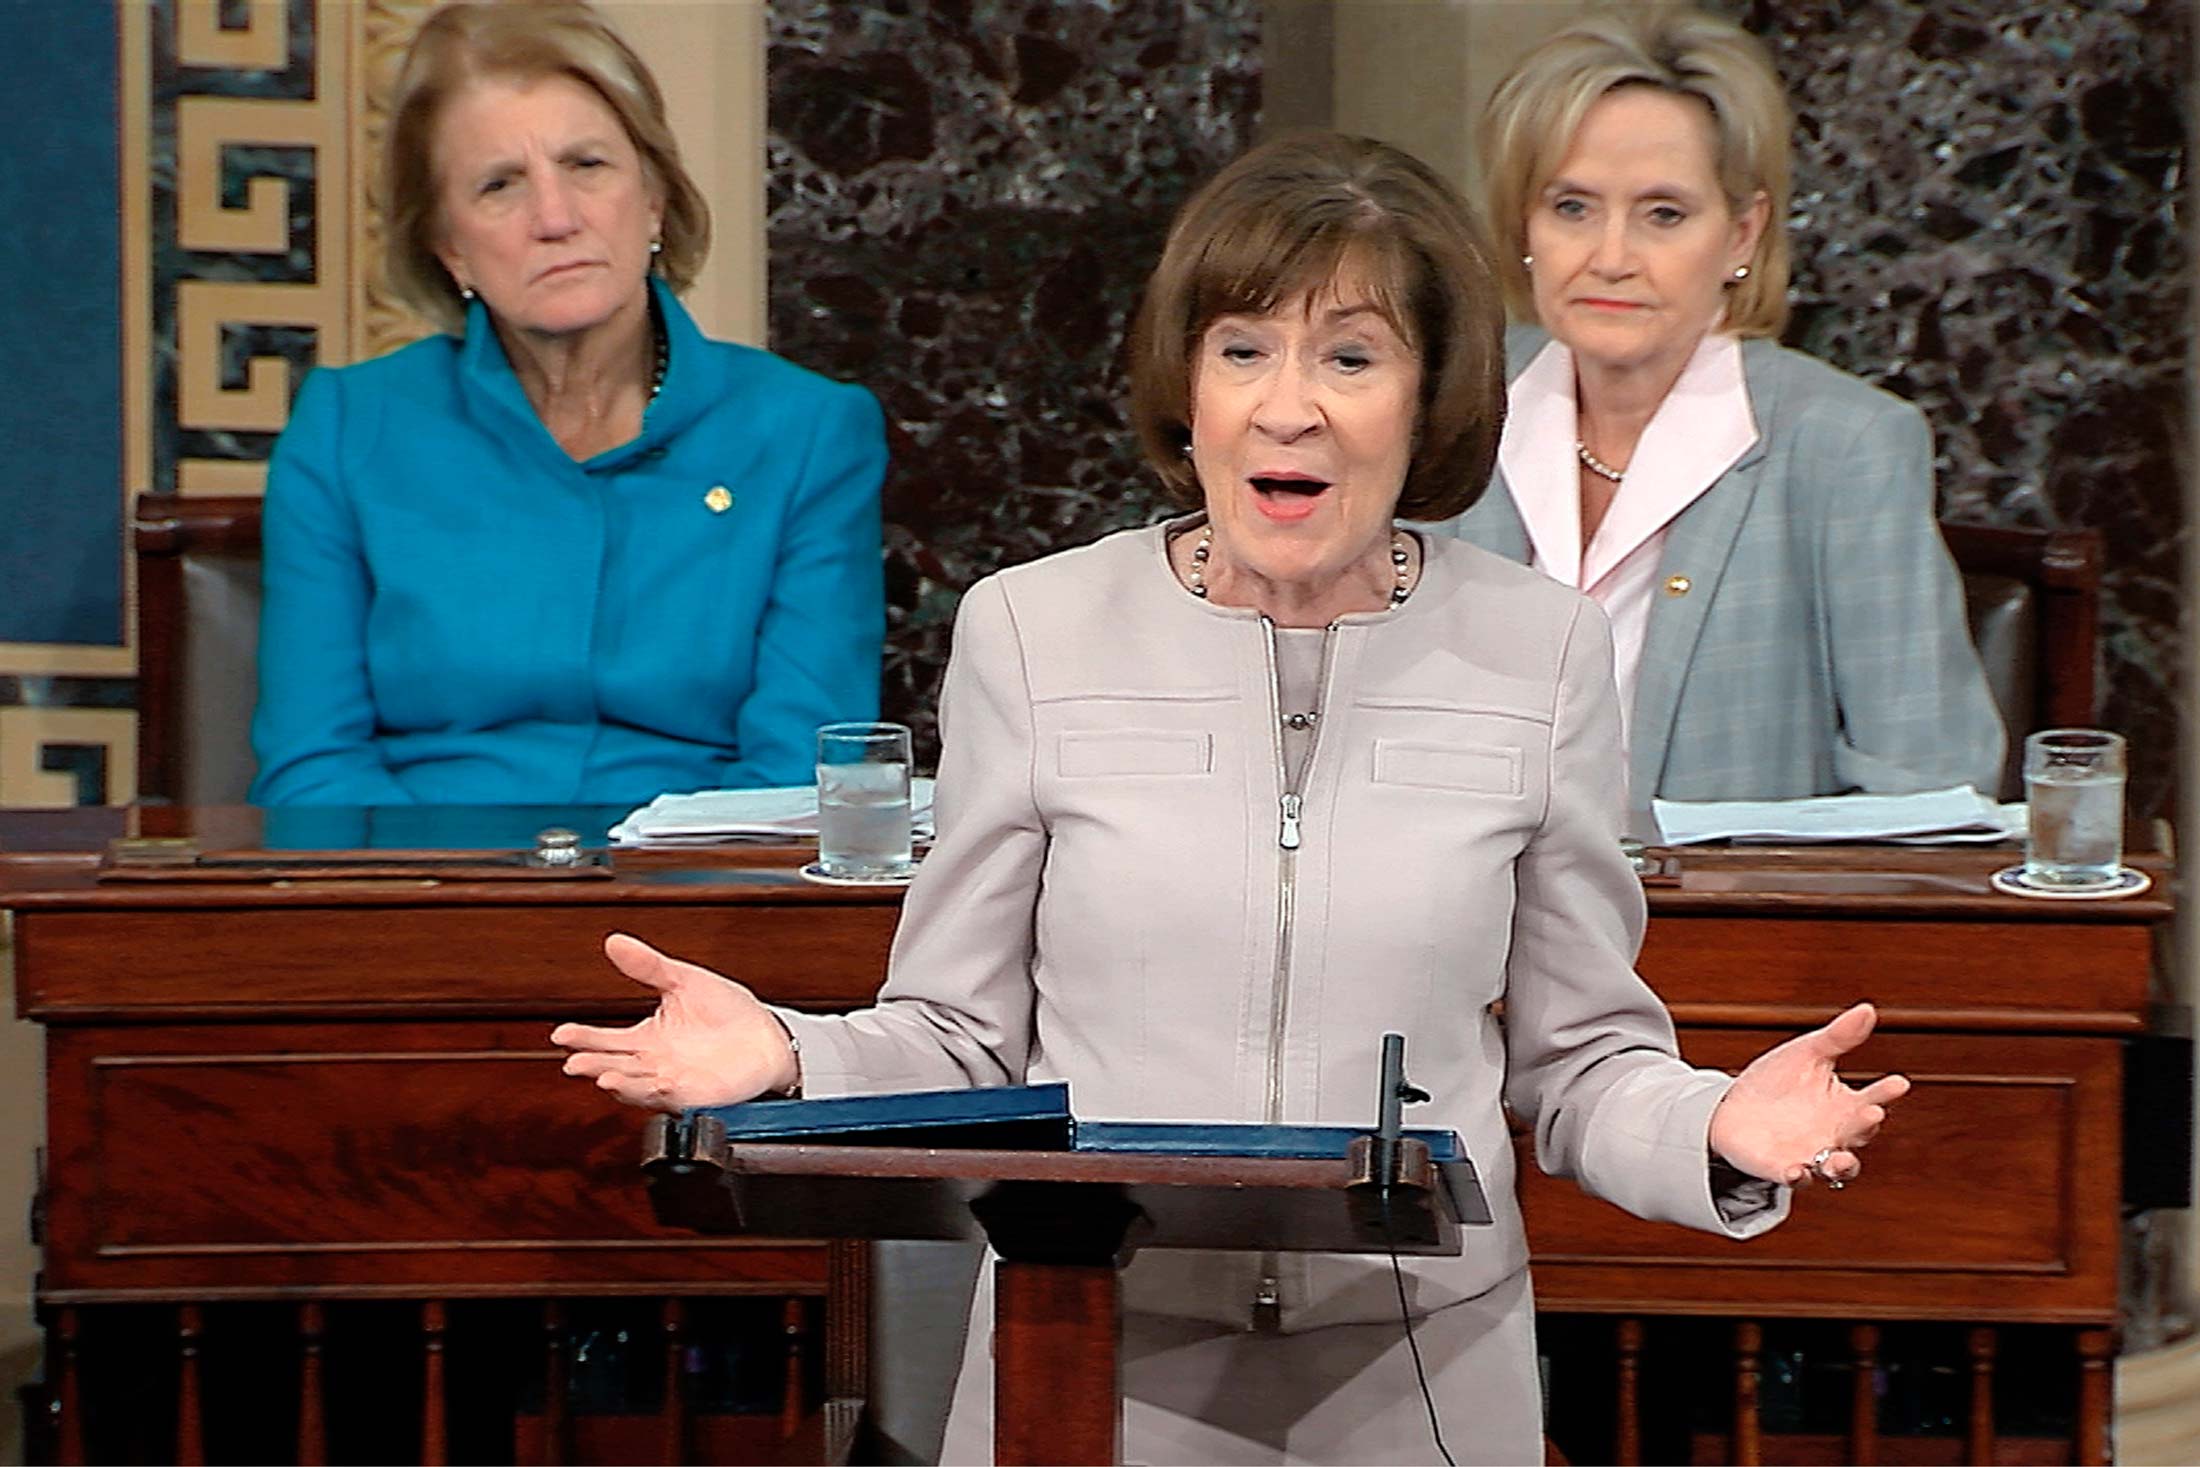 Susan Collins at a podium on the Senate floor with female senators behind her